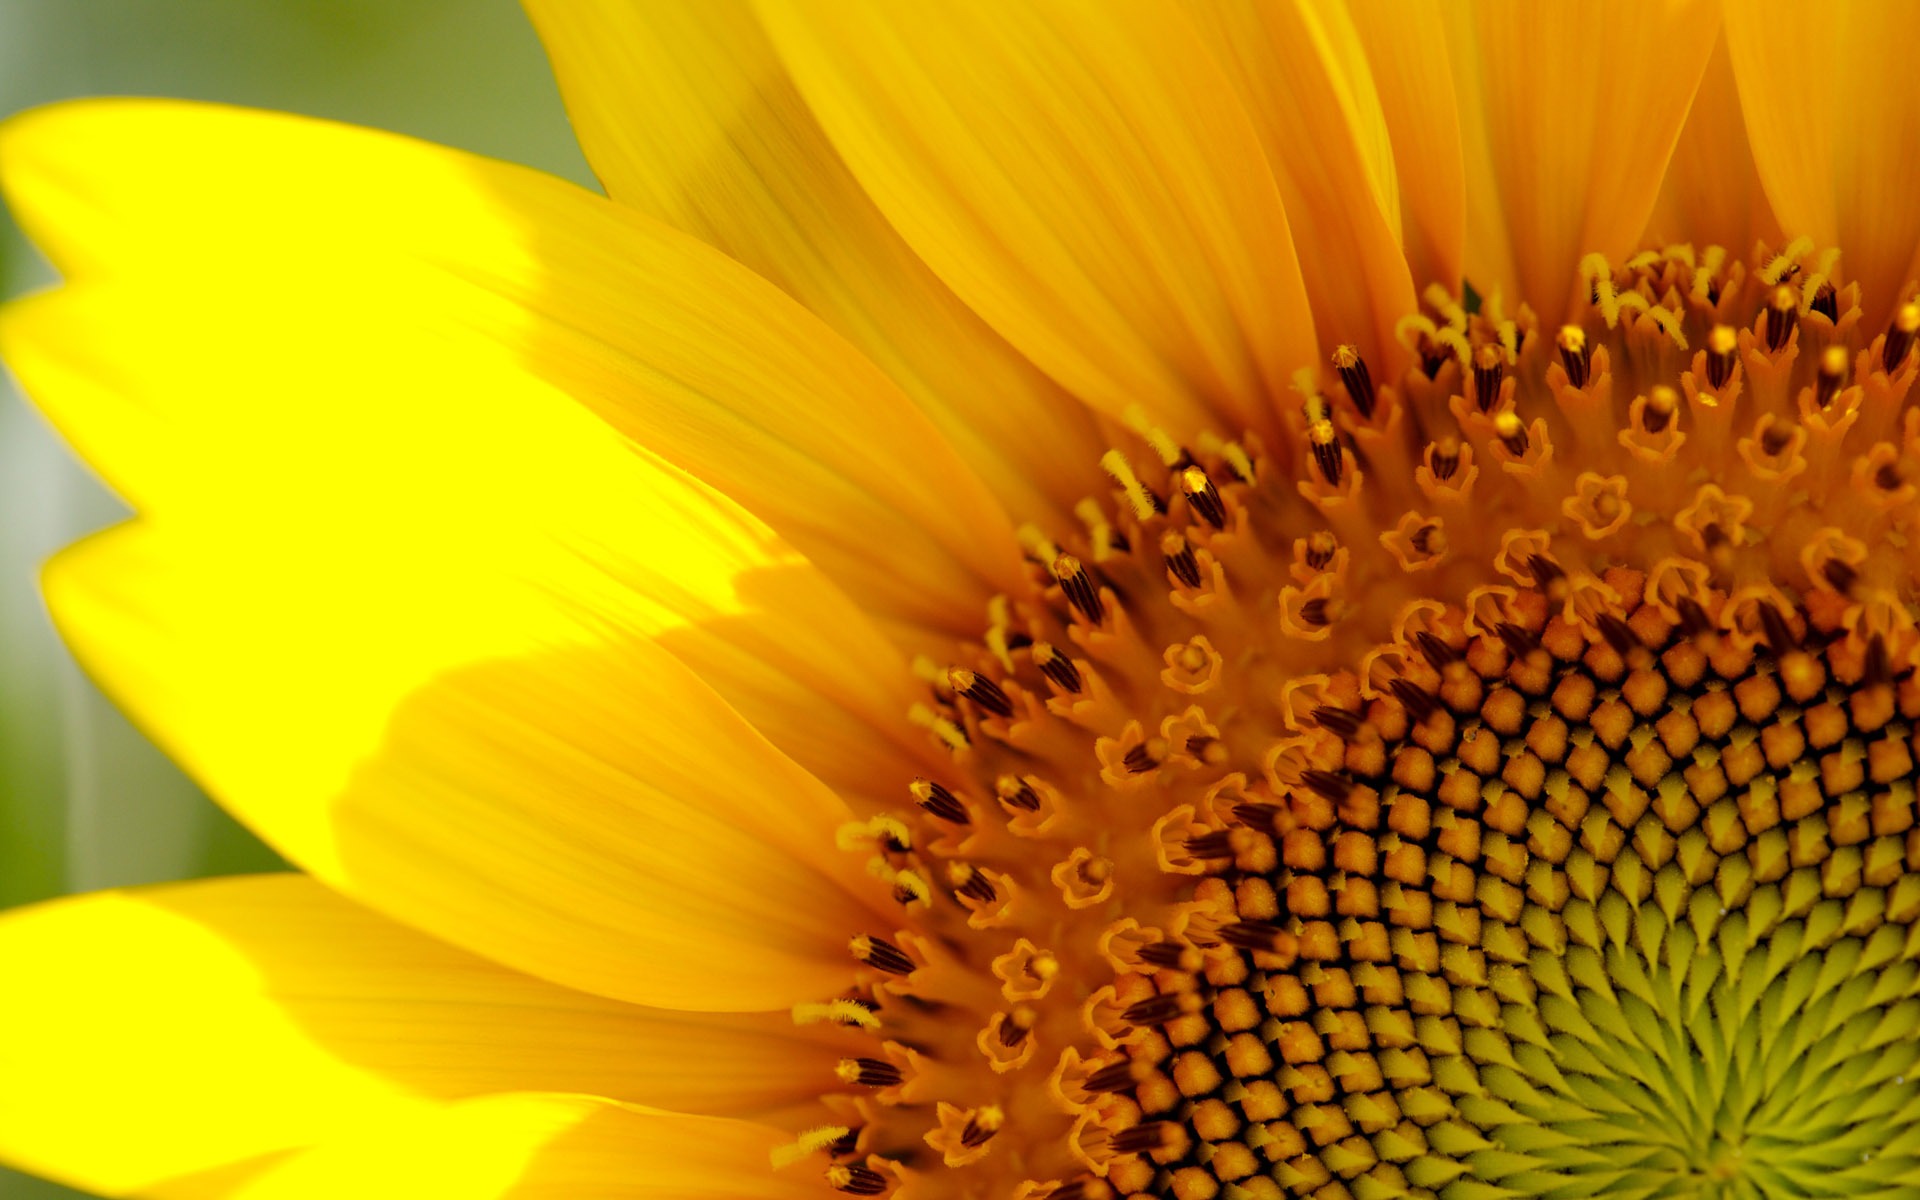 Sunny sunflower photo HD Wallpapers #12 - 1920x1200